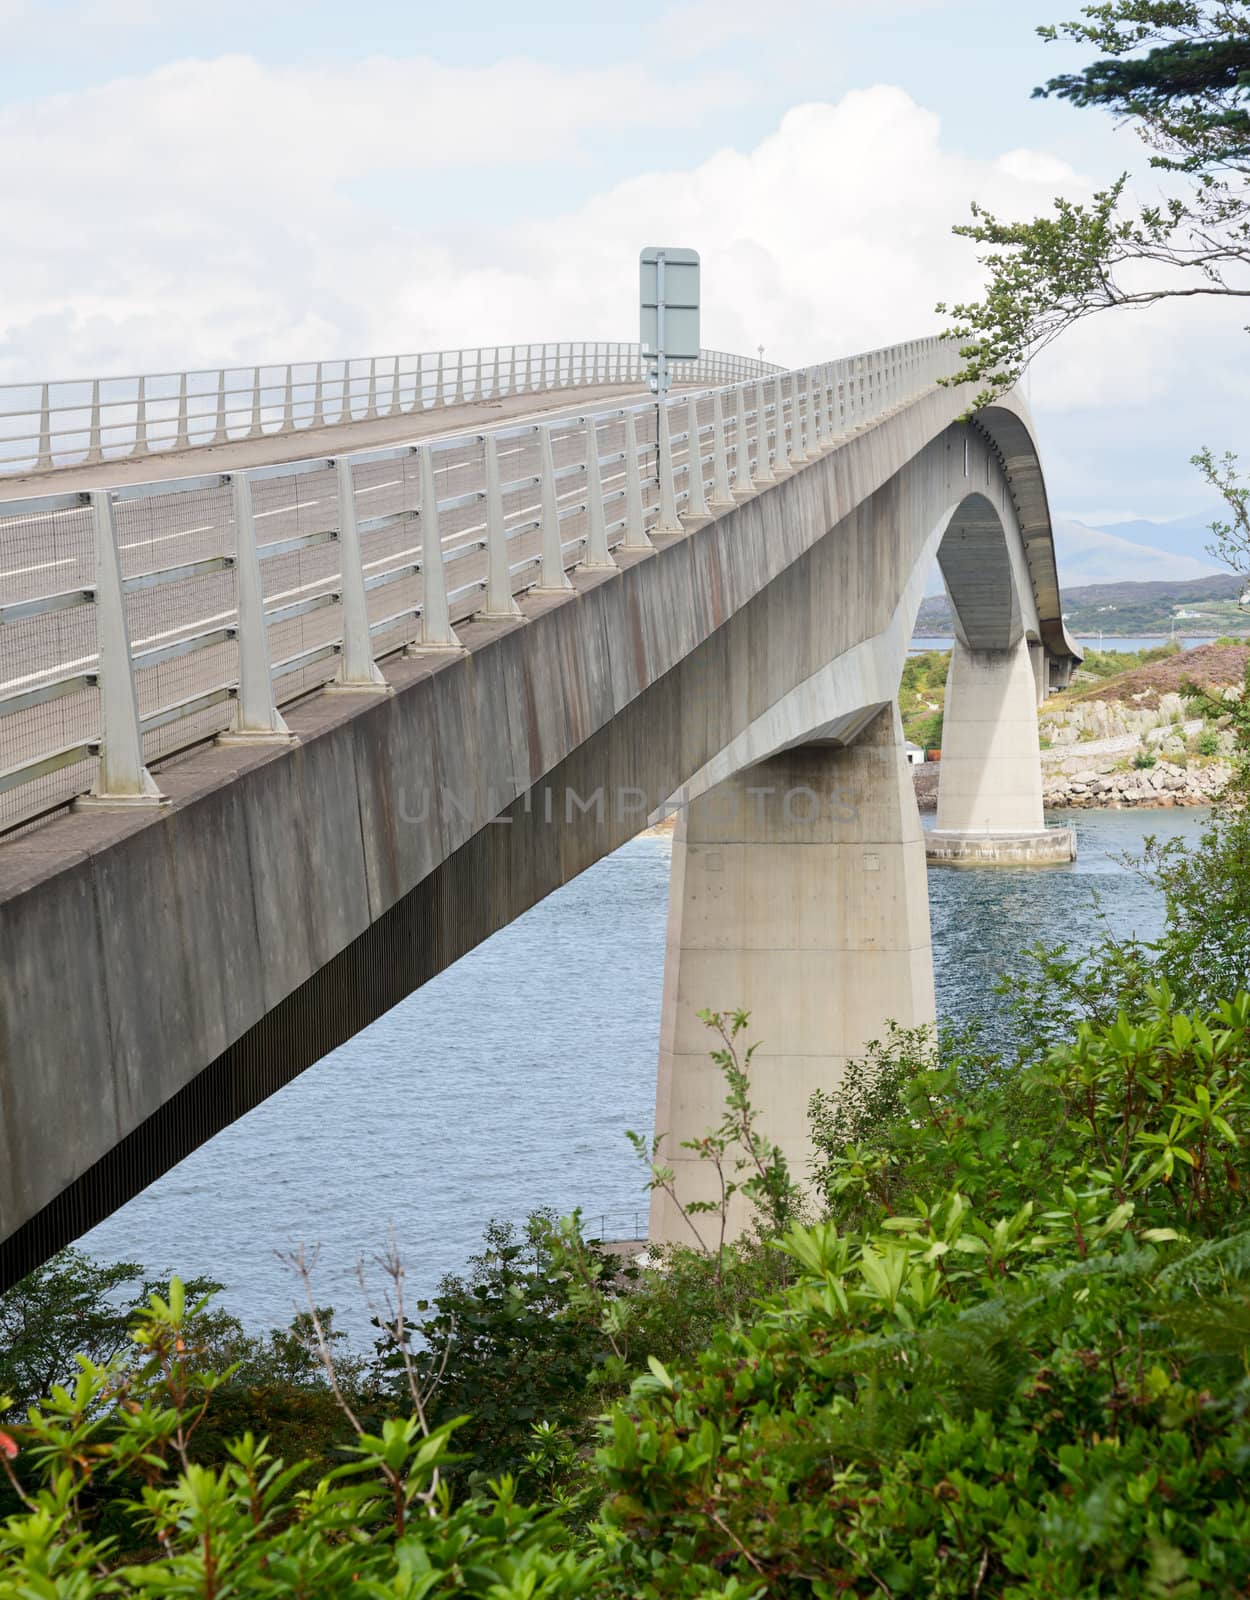 The Skye Bridge over Loch Alsh, connecting mainland Highland with the Isle of Skye in Scotland